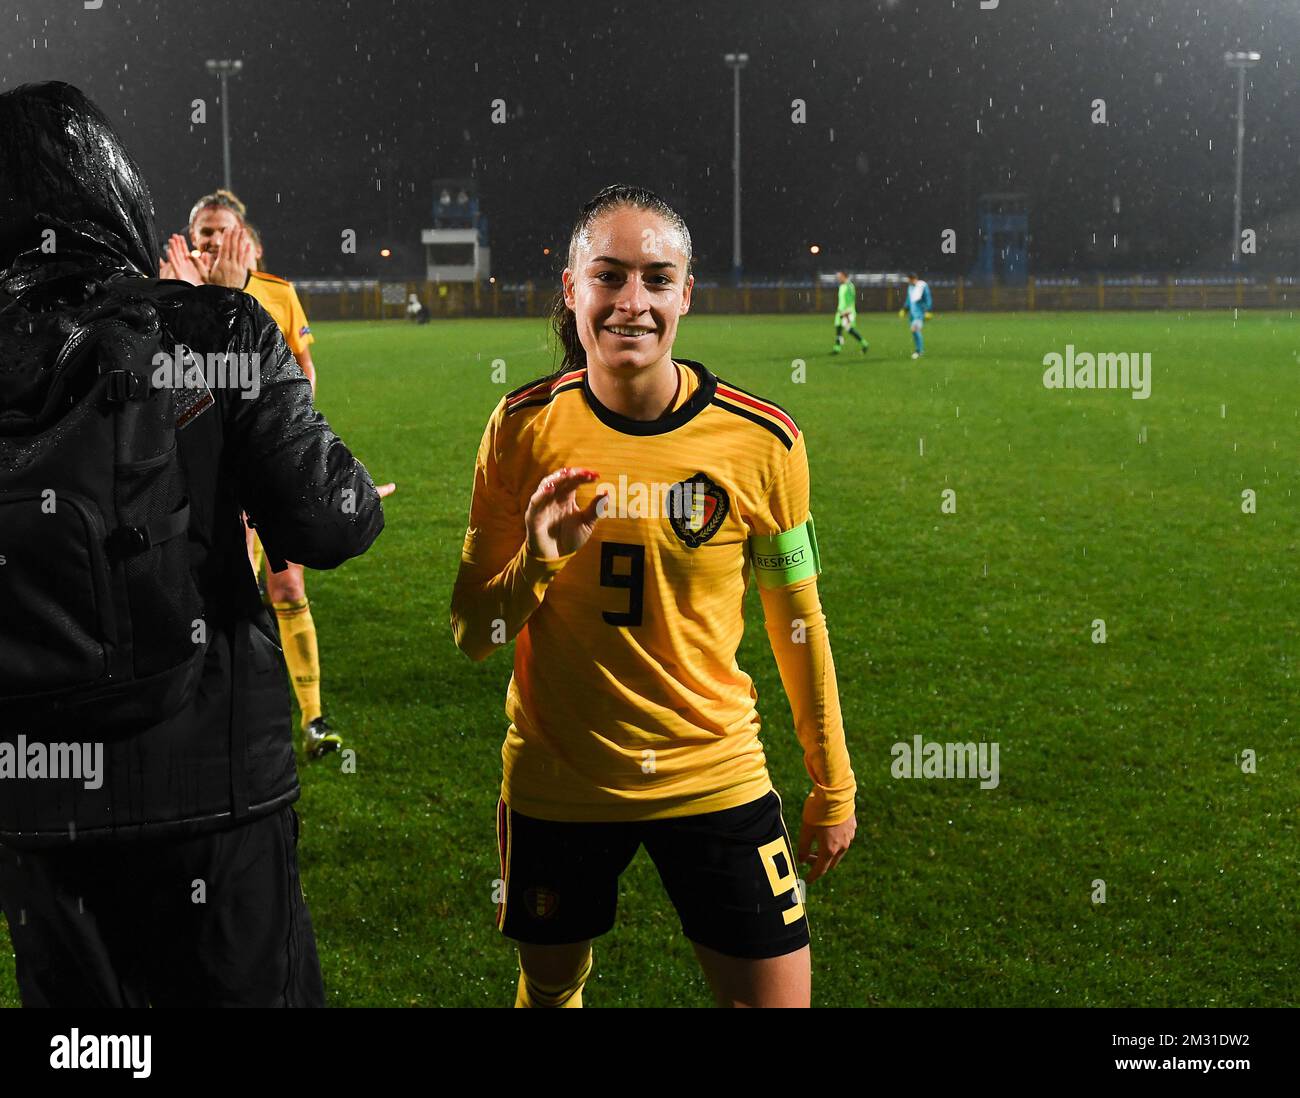 Belgium's Tessa Wullaert celebrates after winning a soccer game between Croatia and Belgium's Red Flames, Friday 08 November 2019 in Zapresic, Croatia, the third out of 8 qualification games for the women's Euro 2021 European Championships. BELGA PHOTO DAVID CATRY Stock Photo